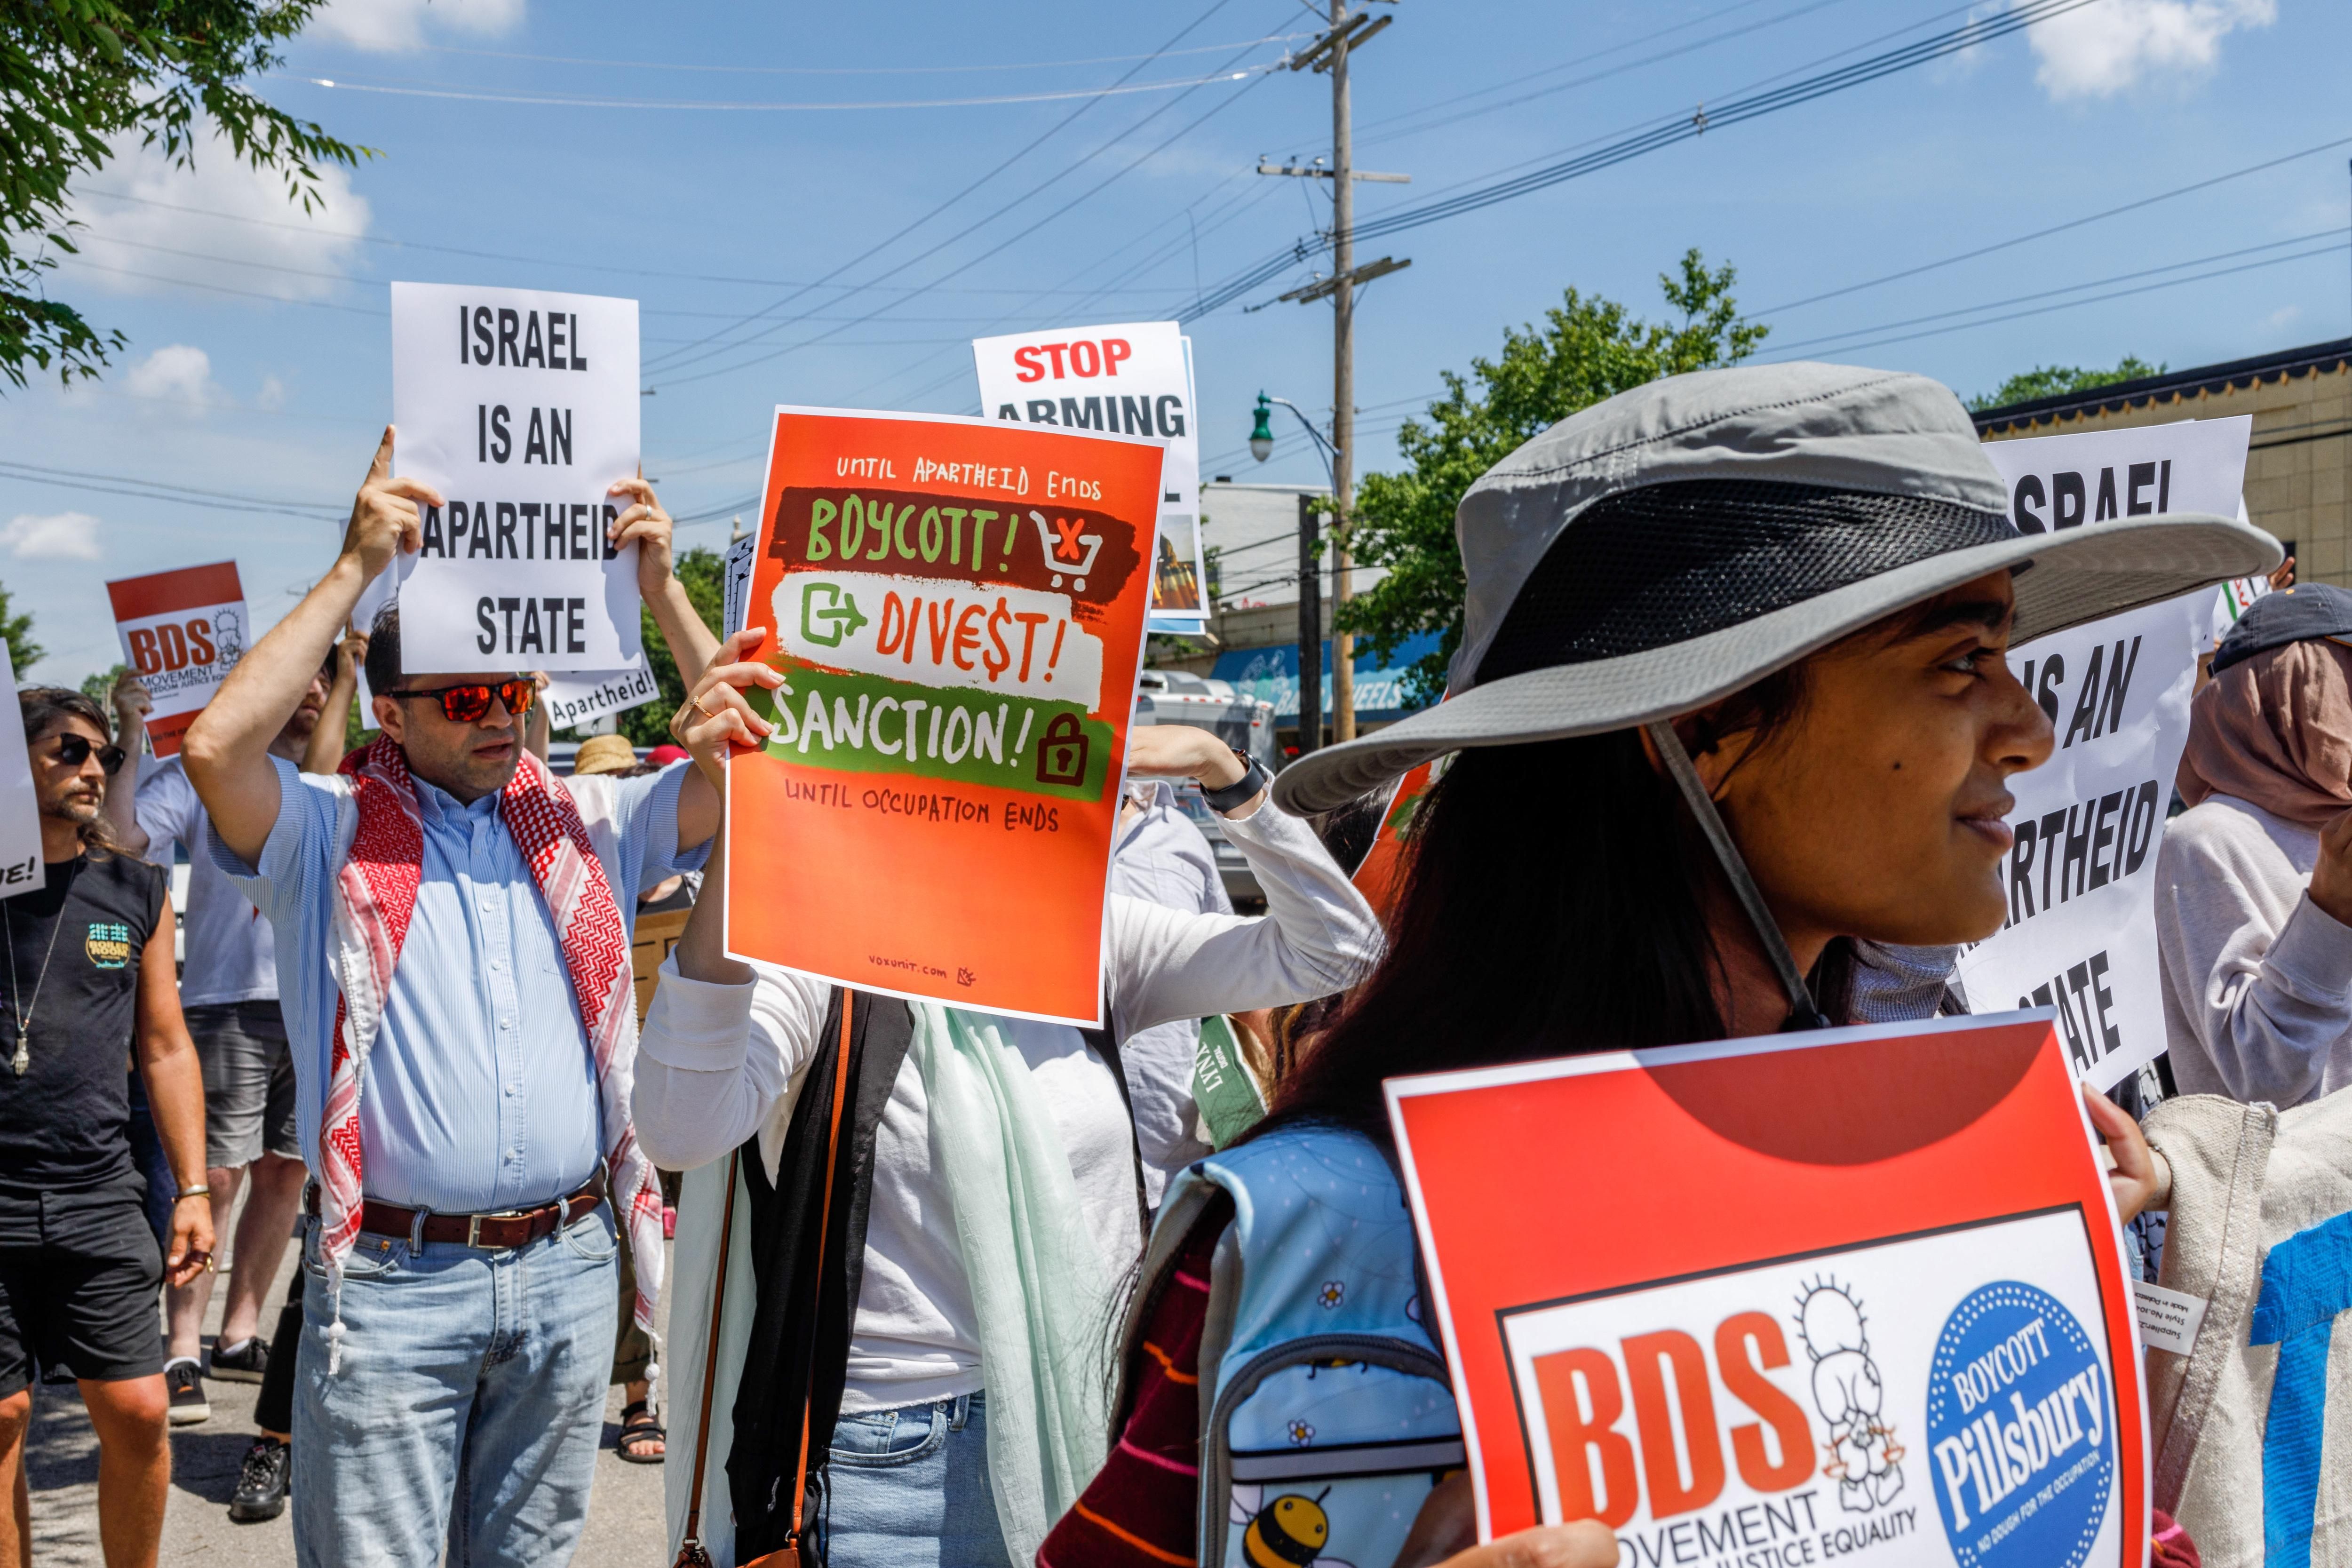 People gather in Columbus, Ohio on June 12, 2021, to protest the Israeli occupation of Palestine and call for boycotting companies that support Israel's apartheid regime.